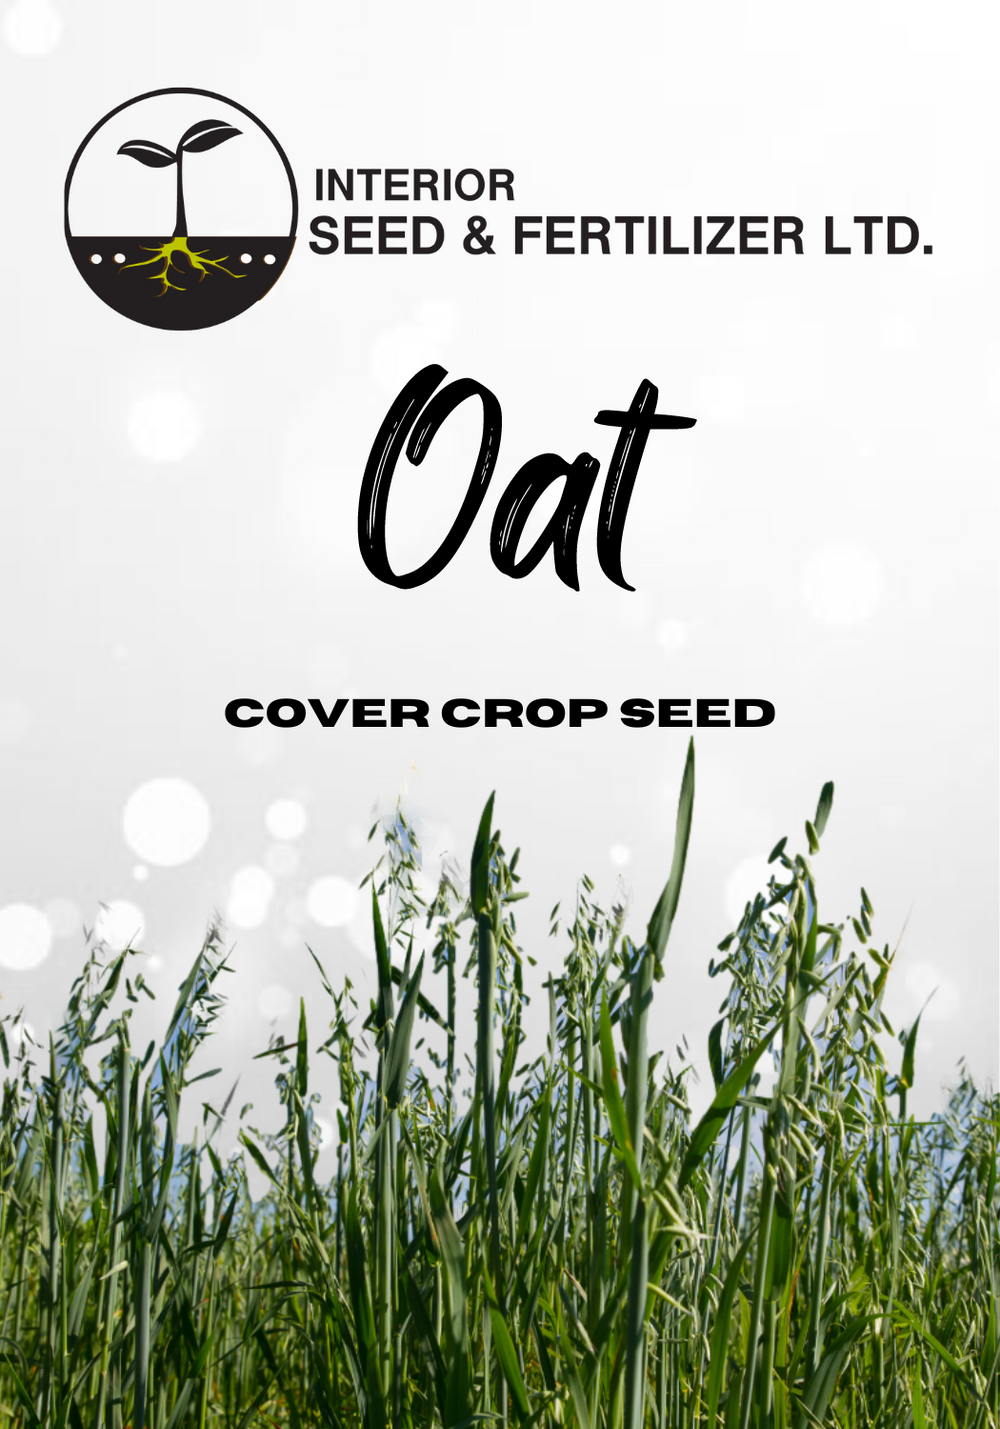 Restore and protect your soil with our Oat cover crop. Oats are a versatile cover crop that offers numerous benefits, including weed suppression, erosion control, and organic matter addition. With their fibrous root system, oats help improve soil structure and retain moisture.  From Interior Seed and Fertilizer Garden Center and Nursery Cranbrook BC